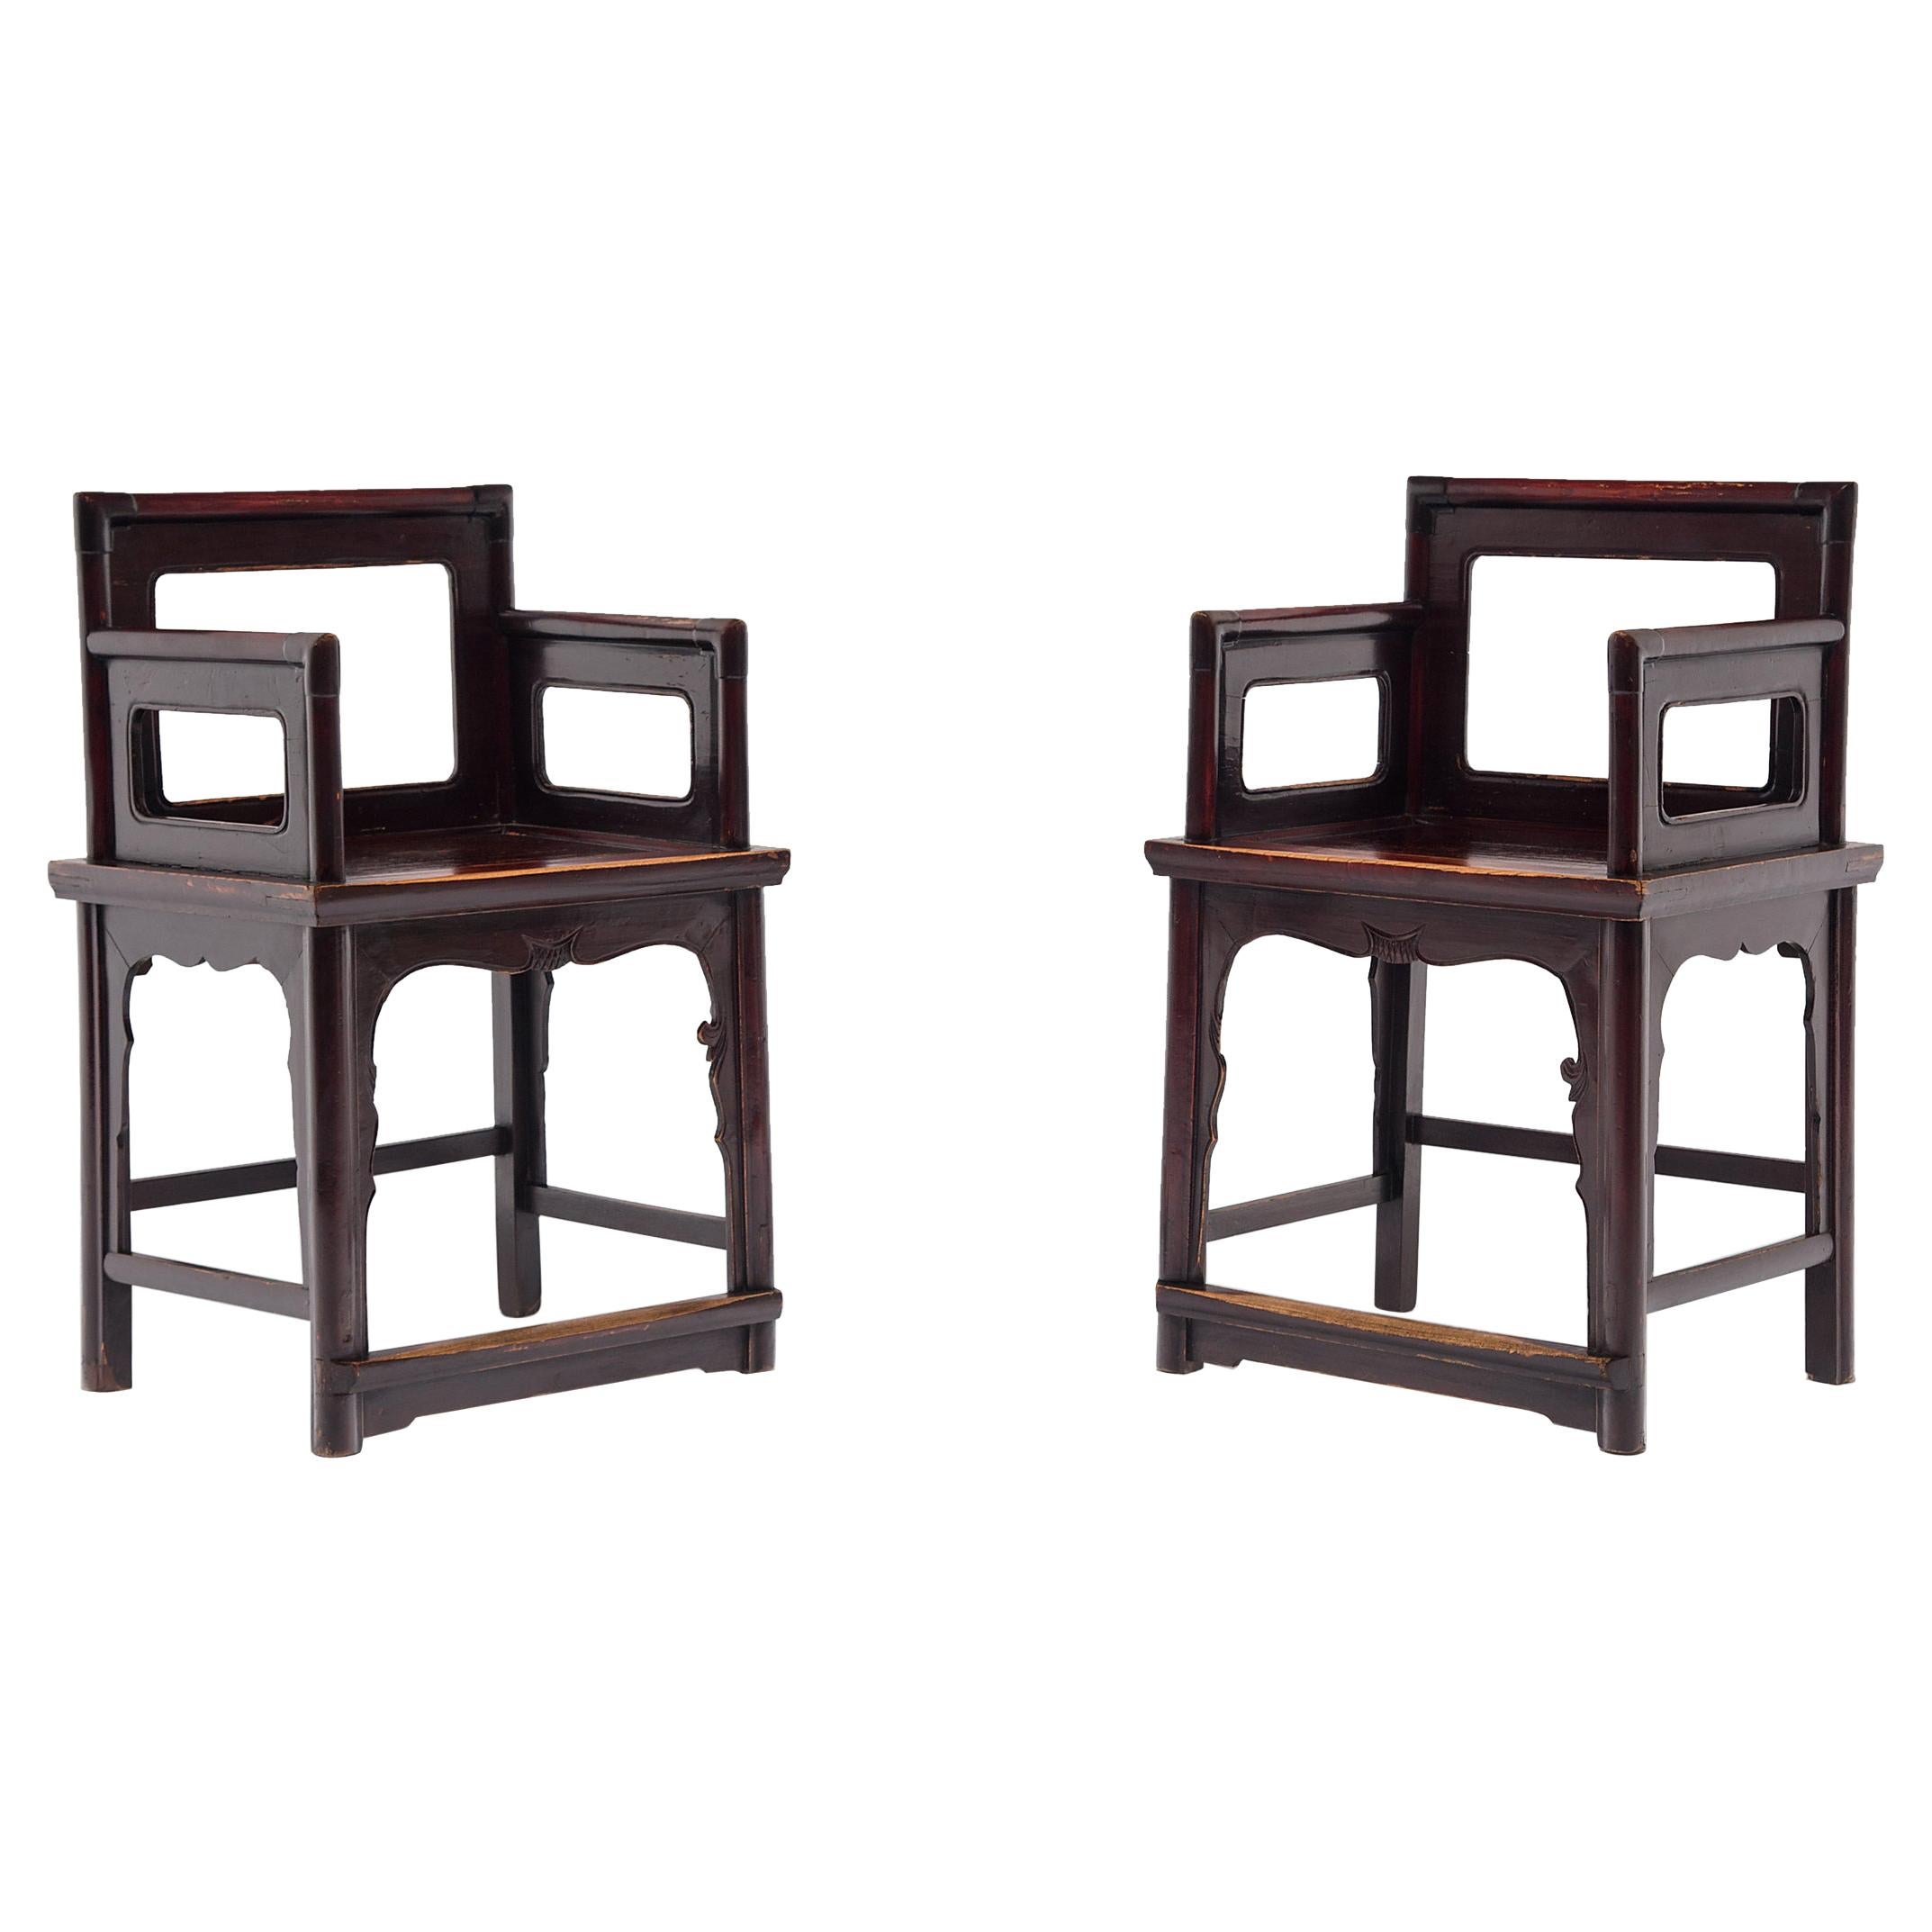 Pair of Chinese Rose Chairs, c. 1850